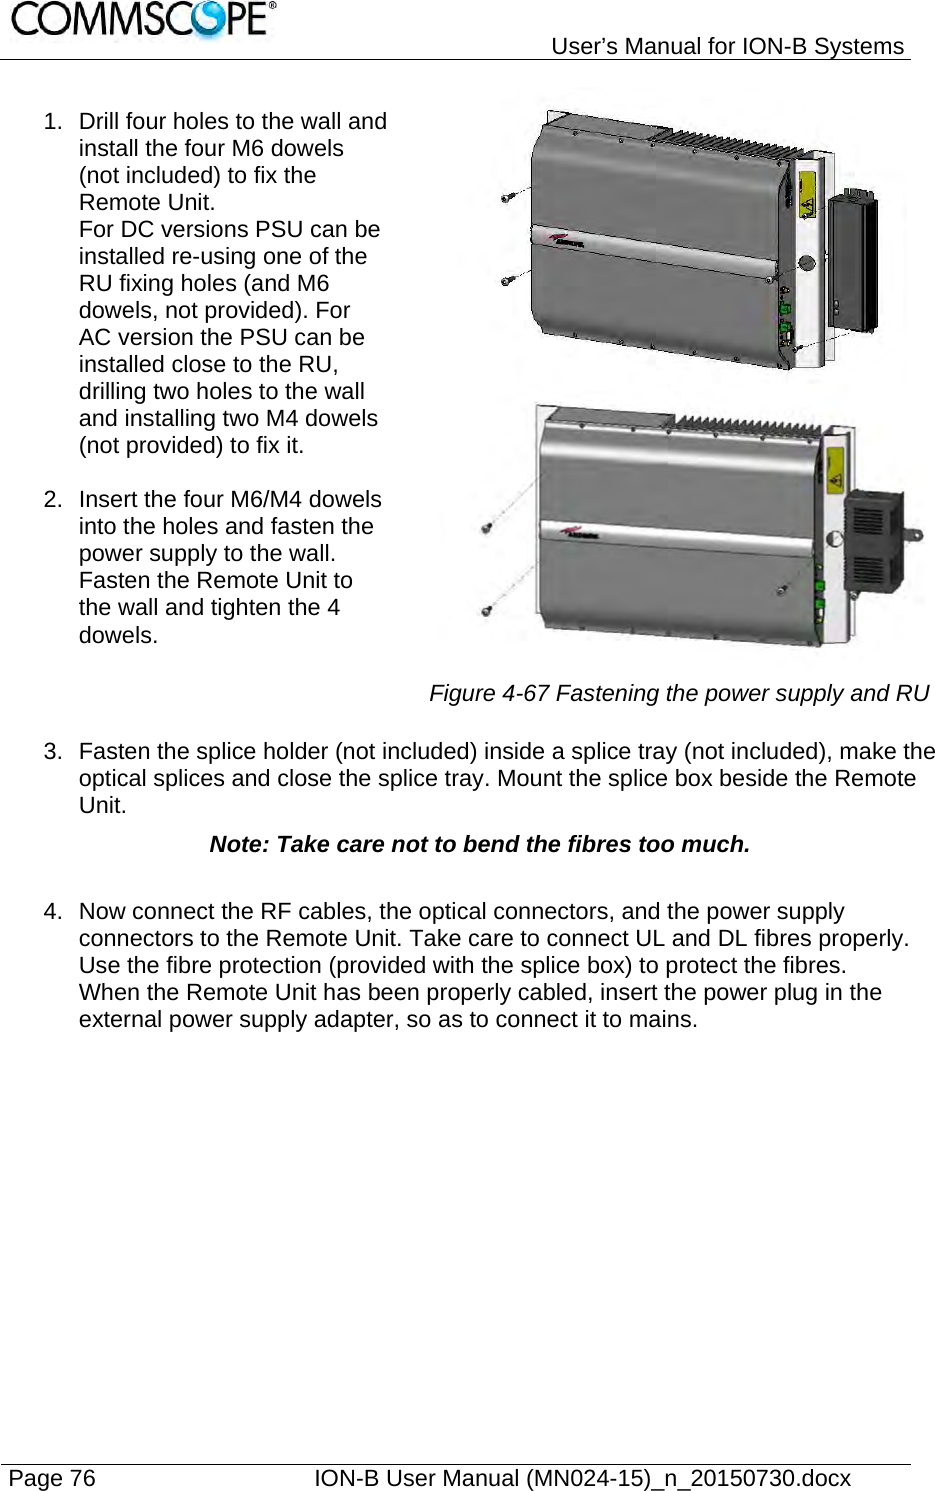   User’s Manual for ION-B Systems Page 76    ION-B User Manual (MN024-15)_n_20150730.docx  1.  Drill four holes to the wall and install the four M6 dowels (not included) to fix the Remote Unit.  For DC versions PSU can be installed re-using one of the RU fixing holes (and M6 dowels, not provided). For AC version the PSU can be installed close to the RU, drilling two holes to the wall and installing two M4 dowels (not provided) to fix it.  2.  Insert the four M6/M4 dowels into the holes and fasten the power supply to the wall.  Fasten the Remote Unit to the wall and tighten the 4 dowels.  Figure 4-67 Fastening the power supply and RU 3.  Fasten the splice holder (not included) inside a splice tray (not included), make the optical splices and close the splice tray. Mount the splice box beside the Remote Unit.  Note: Take care not to bend the fibres too much. 4.  Now connect the RF cables, the optical connectors, and the power supply connectors to the Remote Unit. Take care to connect UL and DL fibres properly. Use the fibre protection (provided with the splice box) to protect the fibres. When the Remote Unit has been properly cabled, insert the power plug in the external power supply adapter, so as to connect it to mains.   